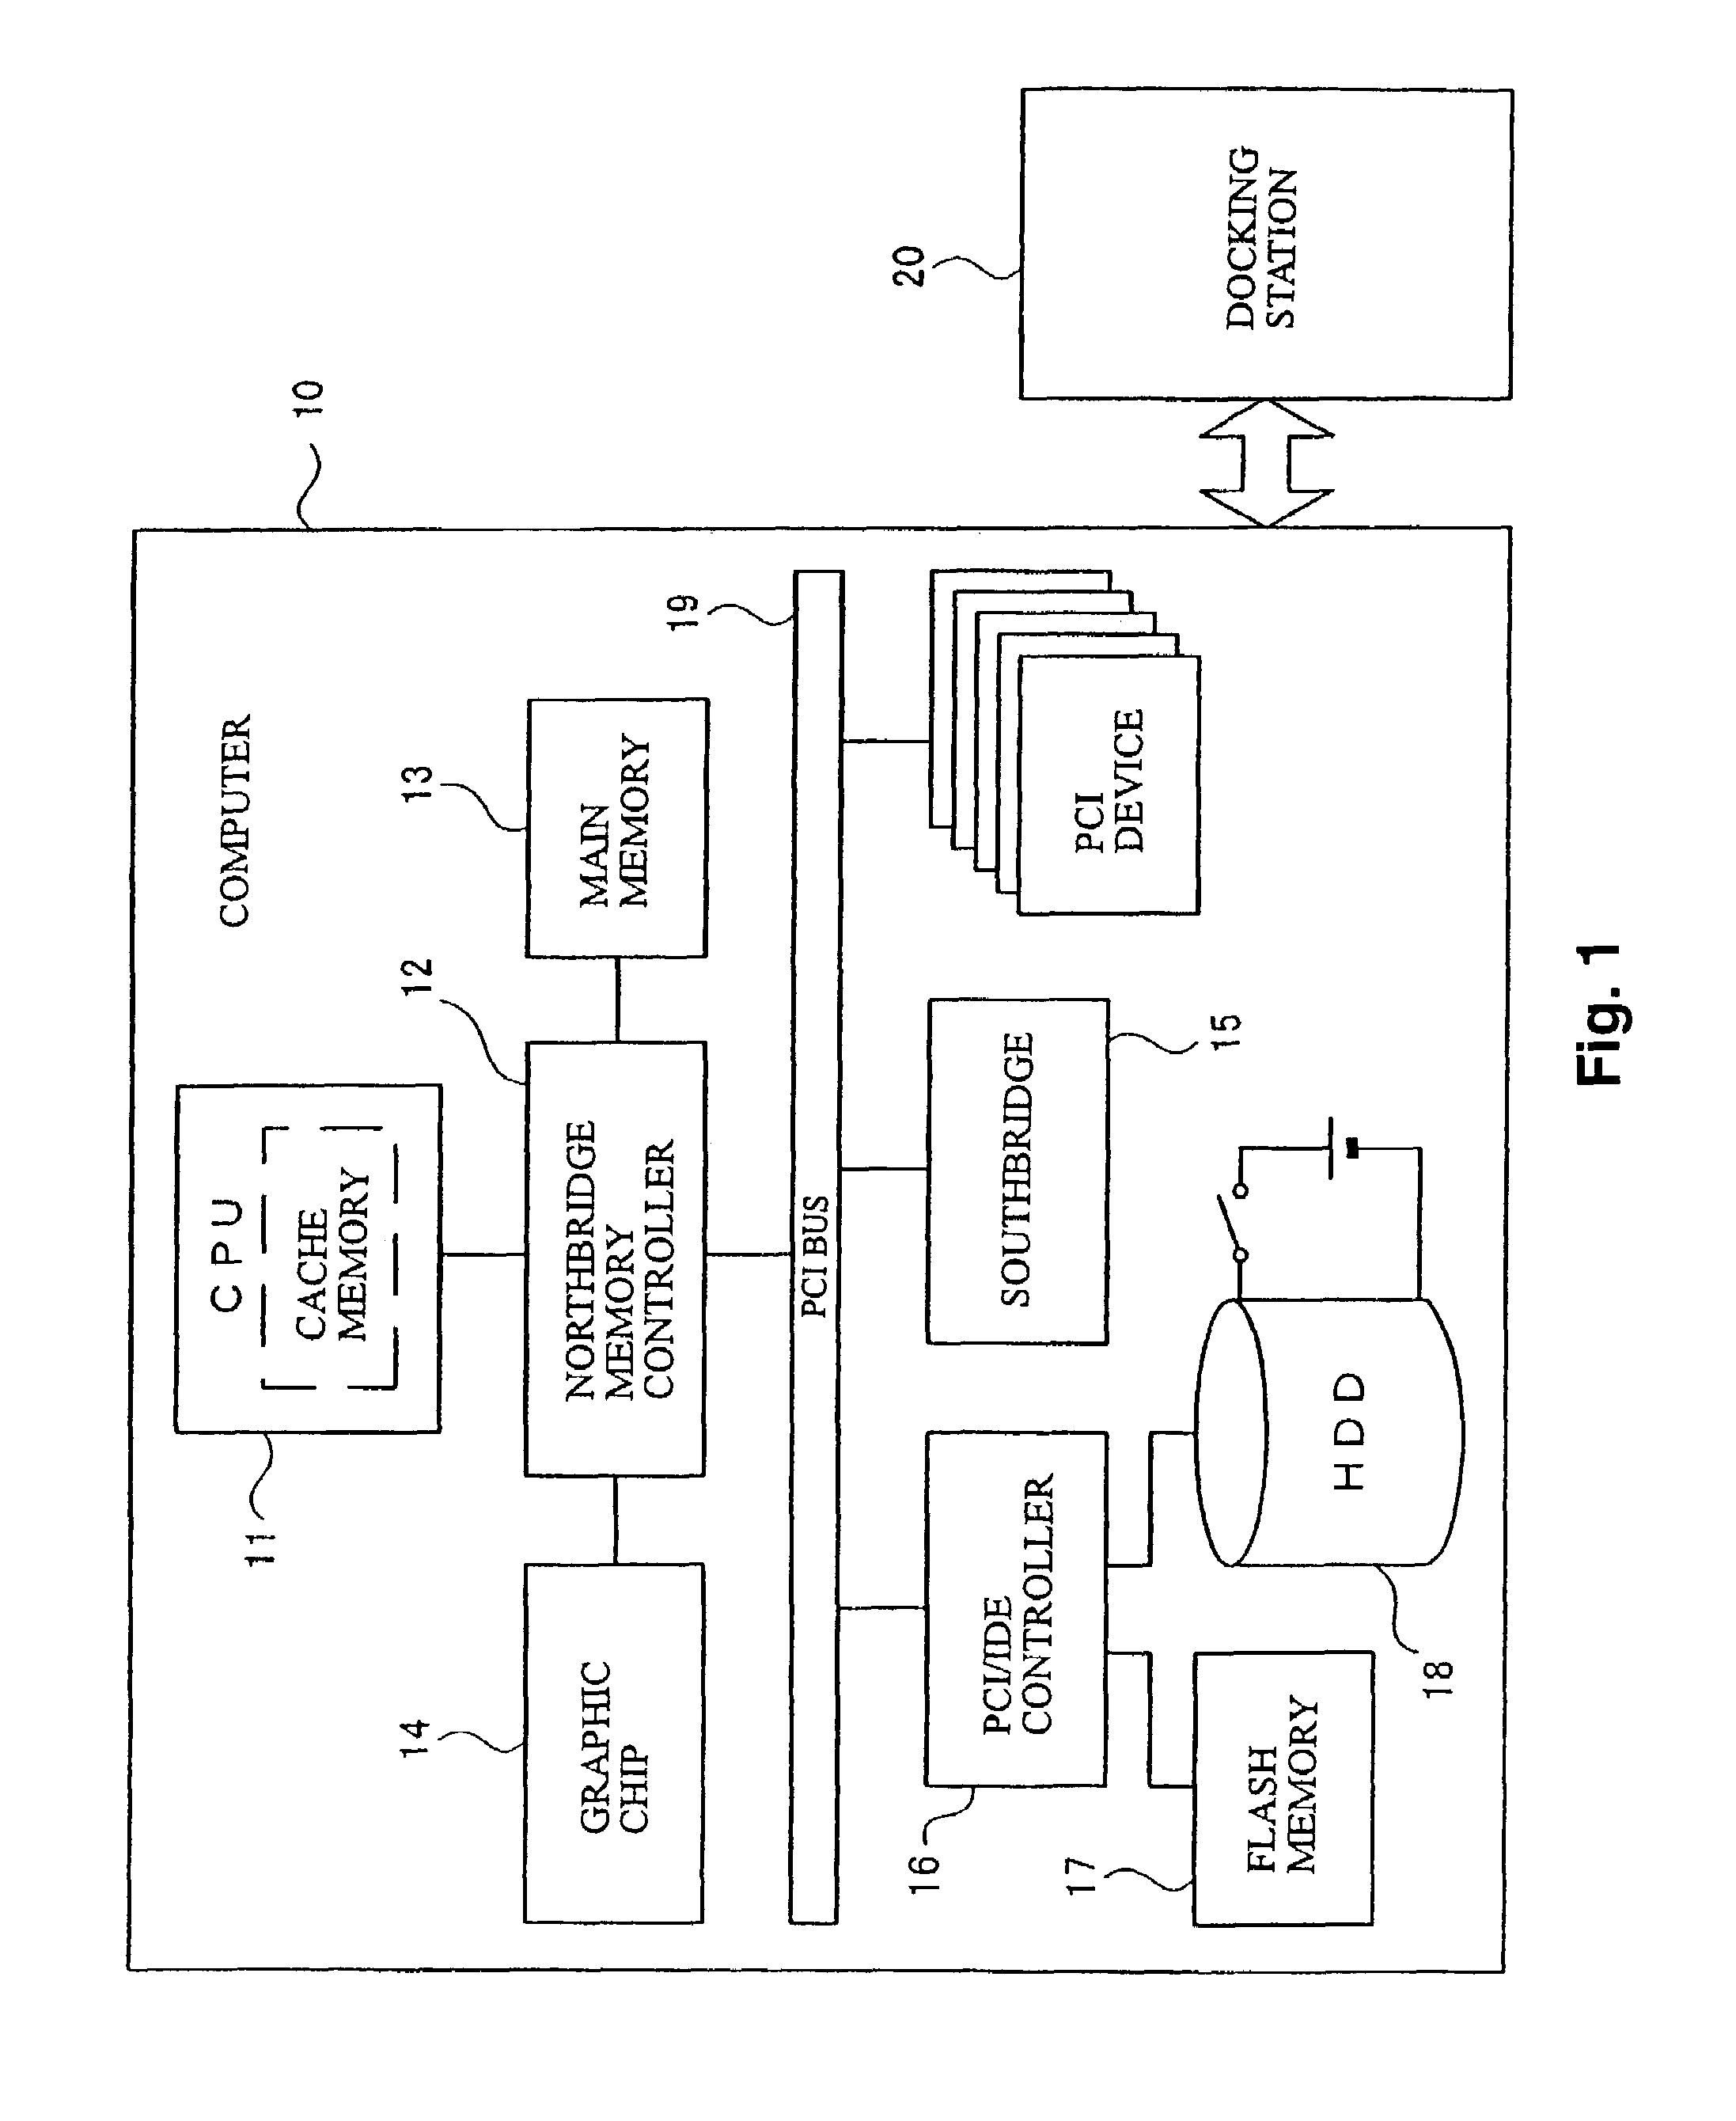 Apparatus, method and program product for selectively starting one of a plurality of operating systems and secondary storage according to whether or not a predetermined peripheral is connected to the system